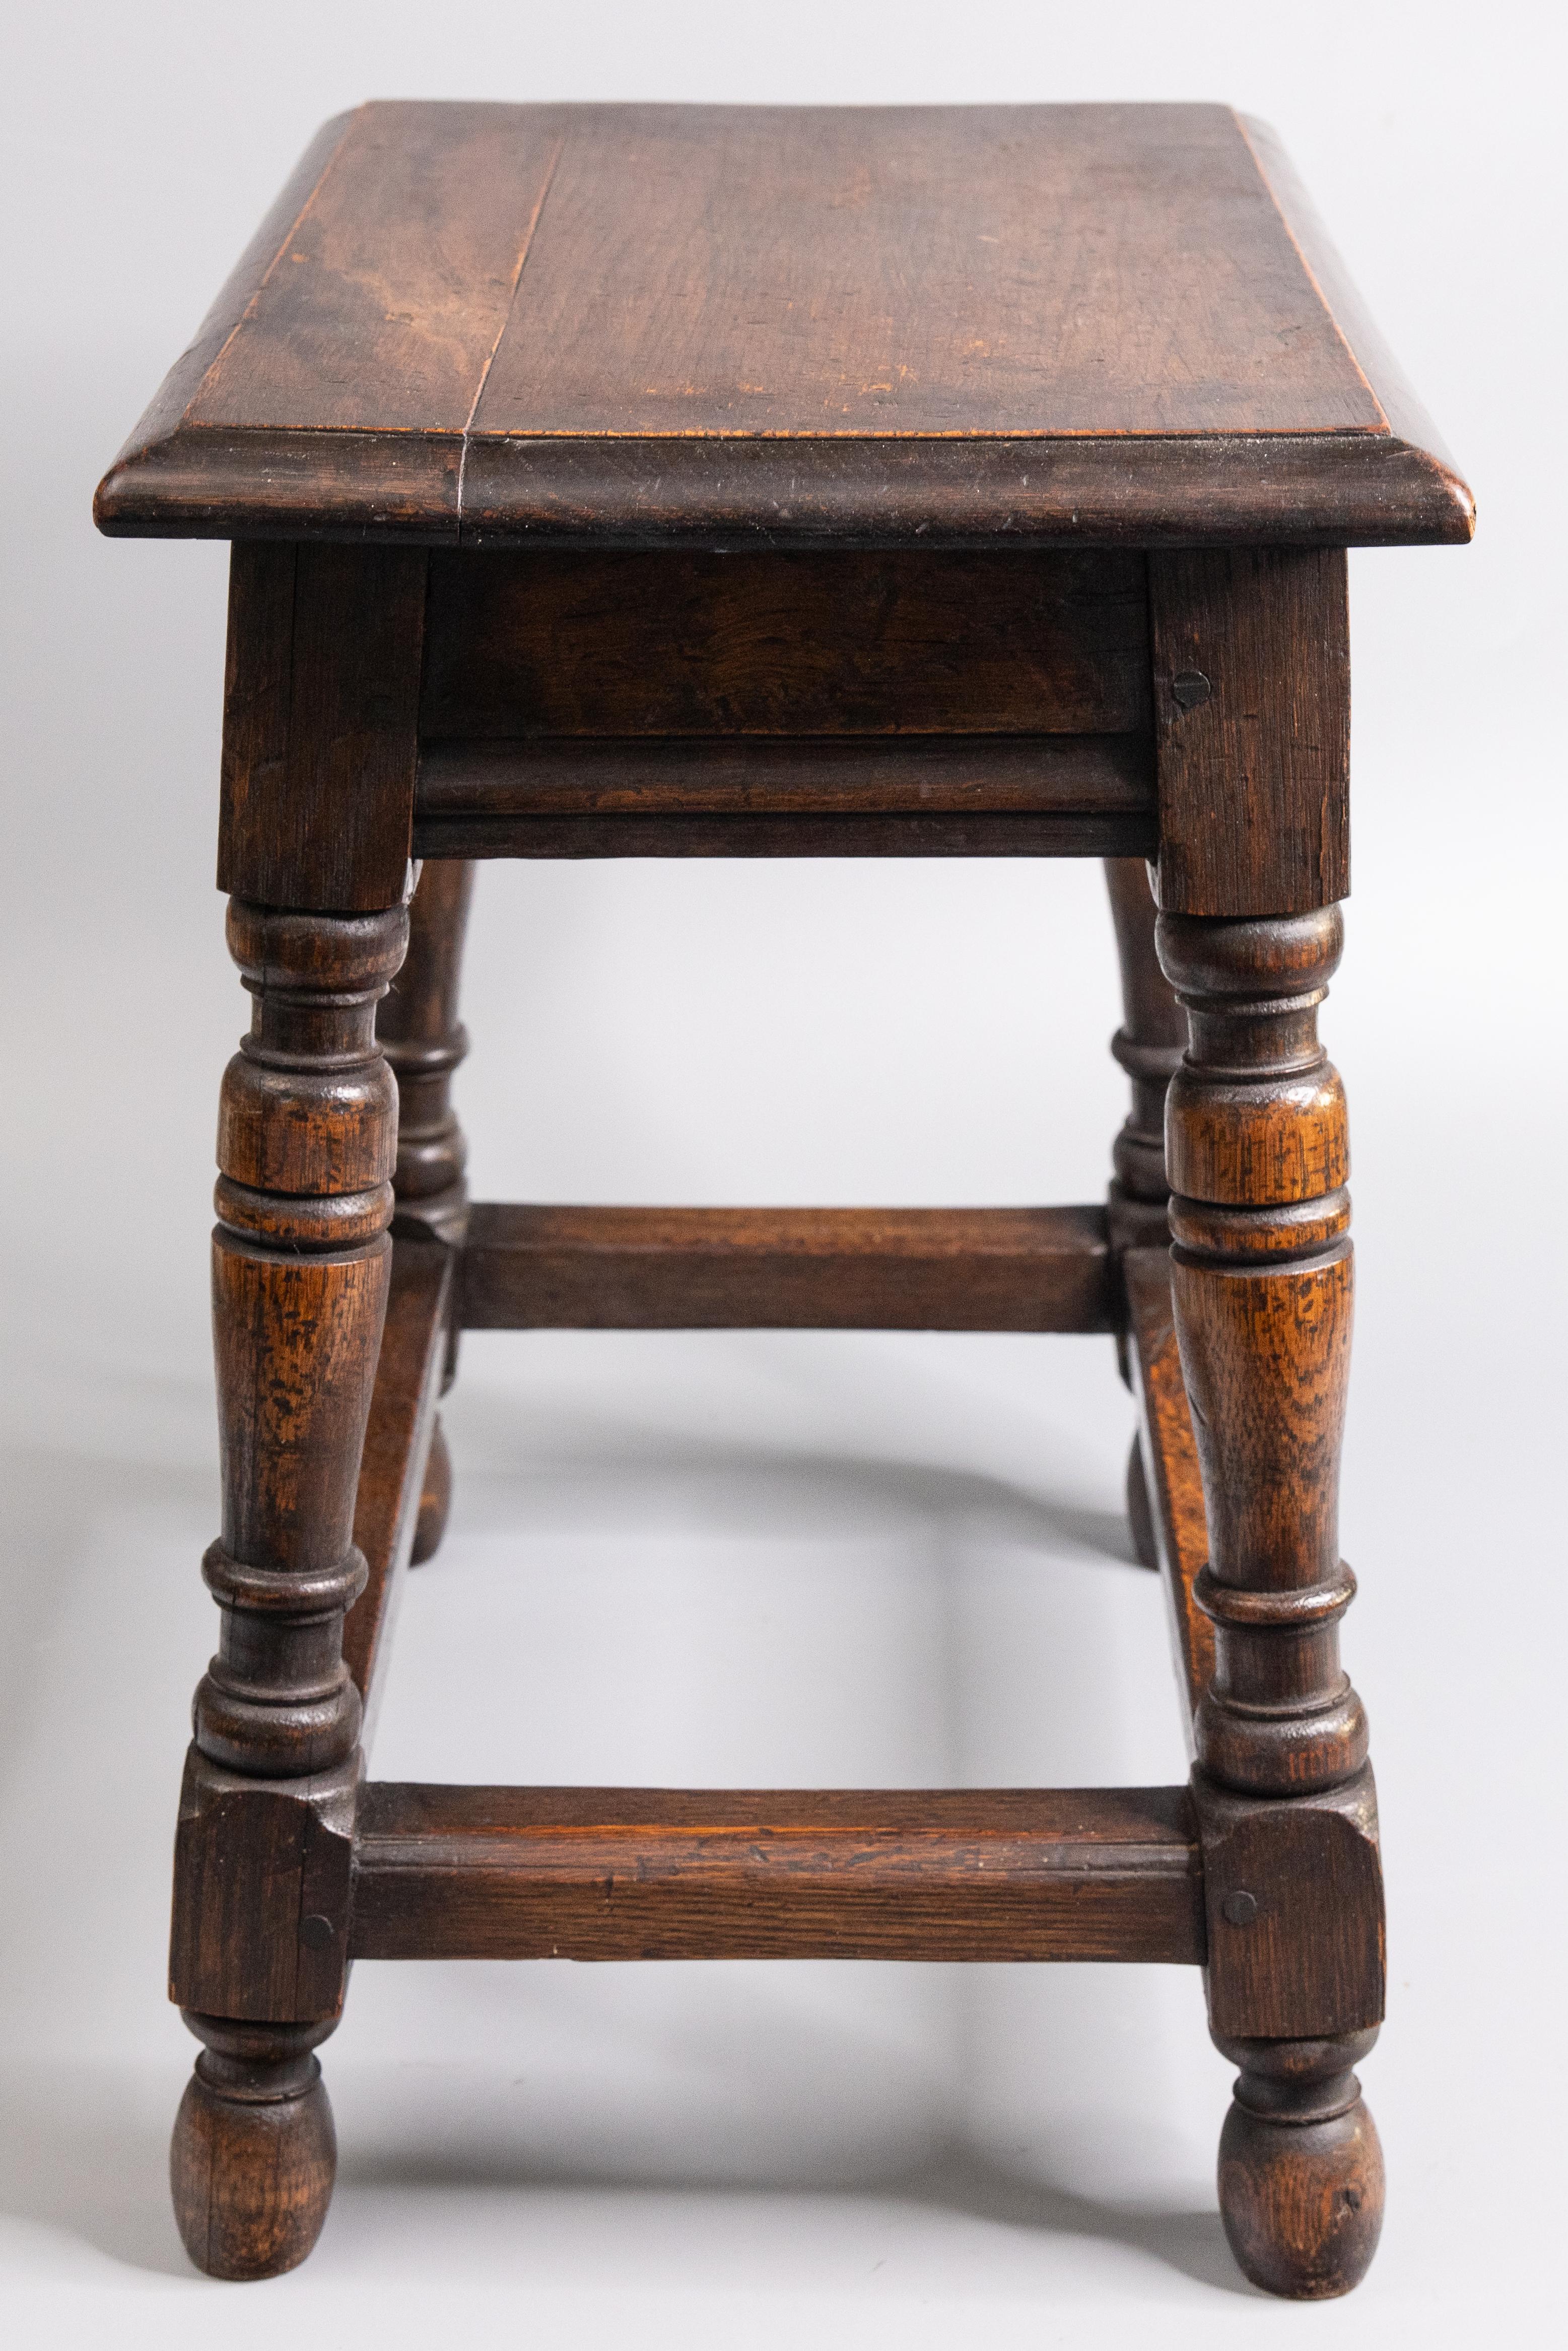 Turned 19th Century English Oak Pegged Joint Stool Side Table